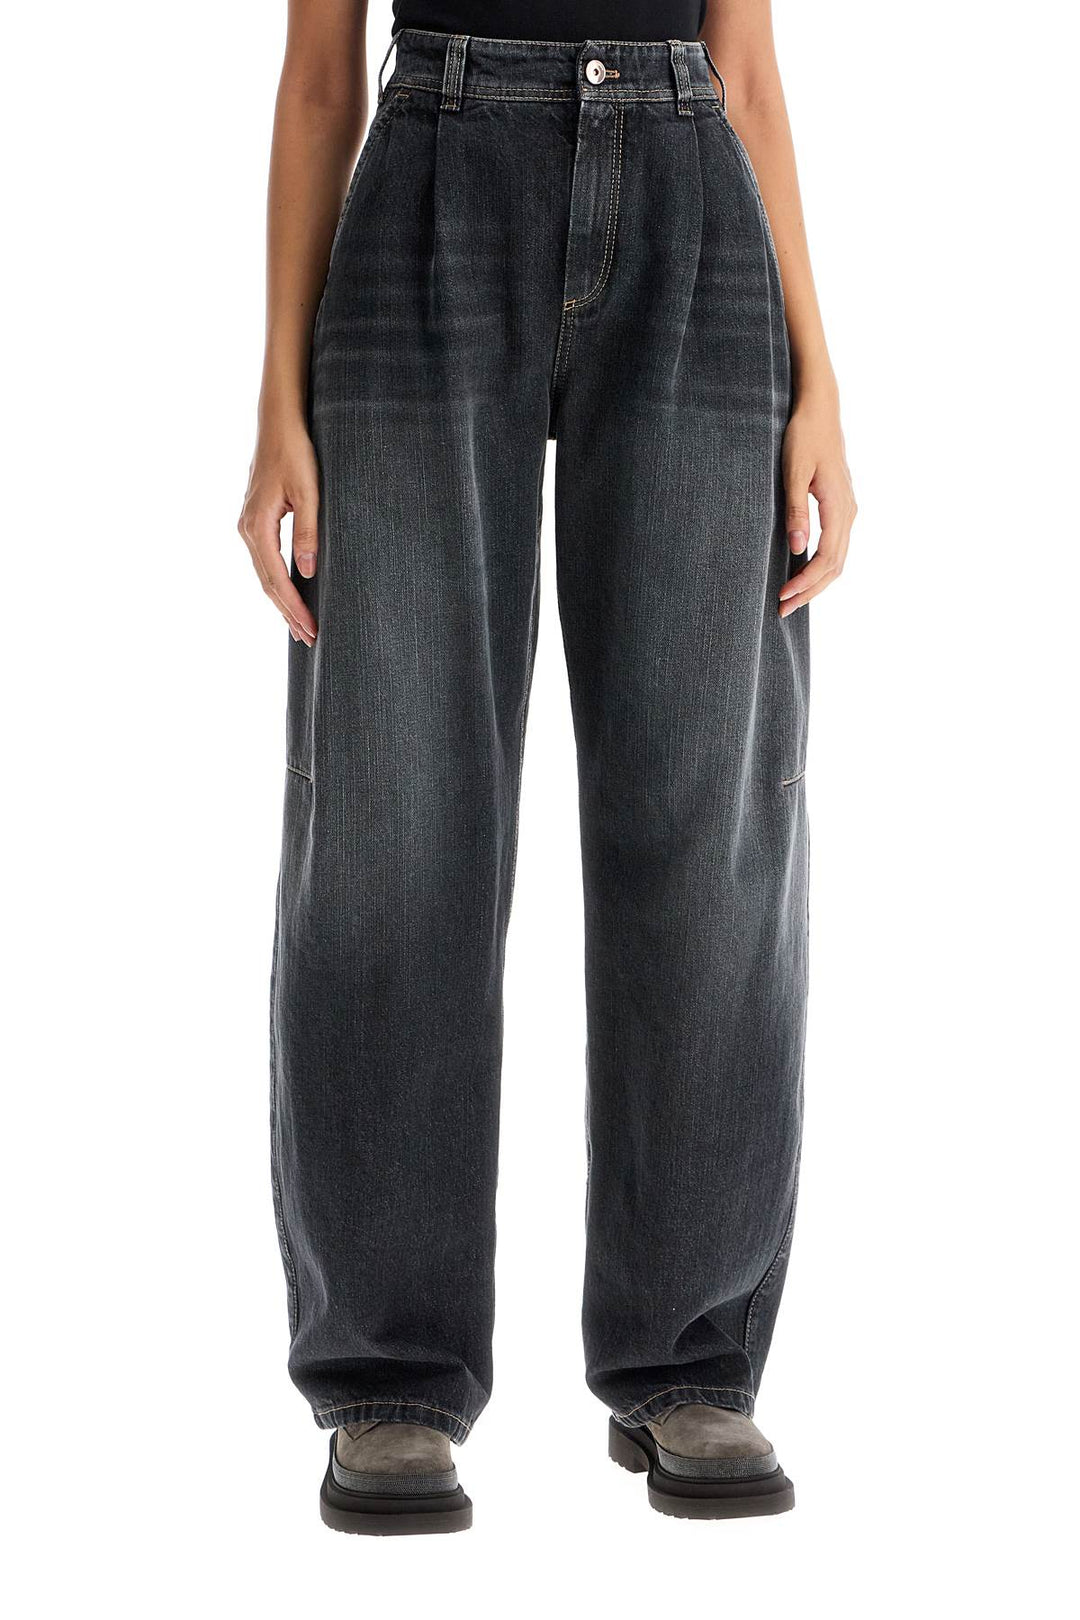 Brunello Cucinelli Curved Leg Jeans For A   Black